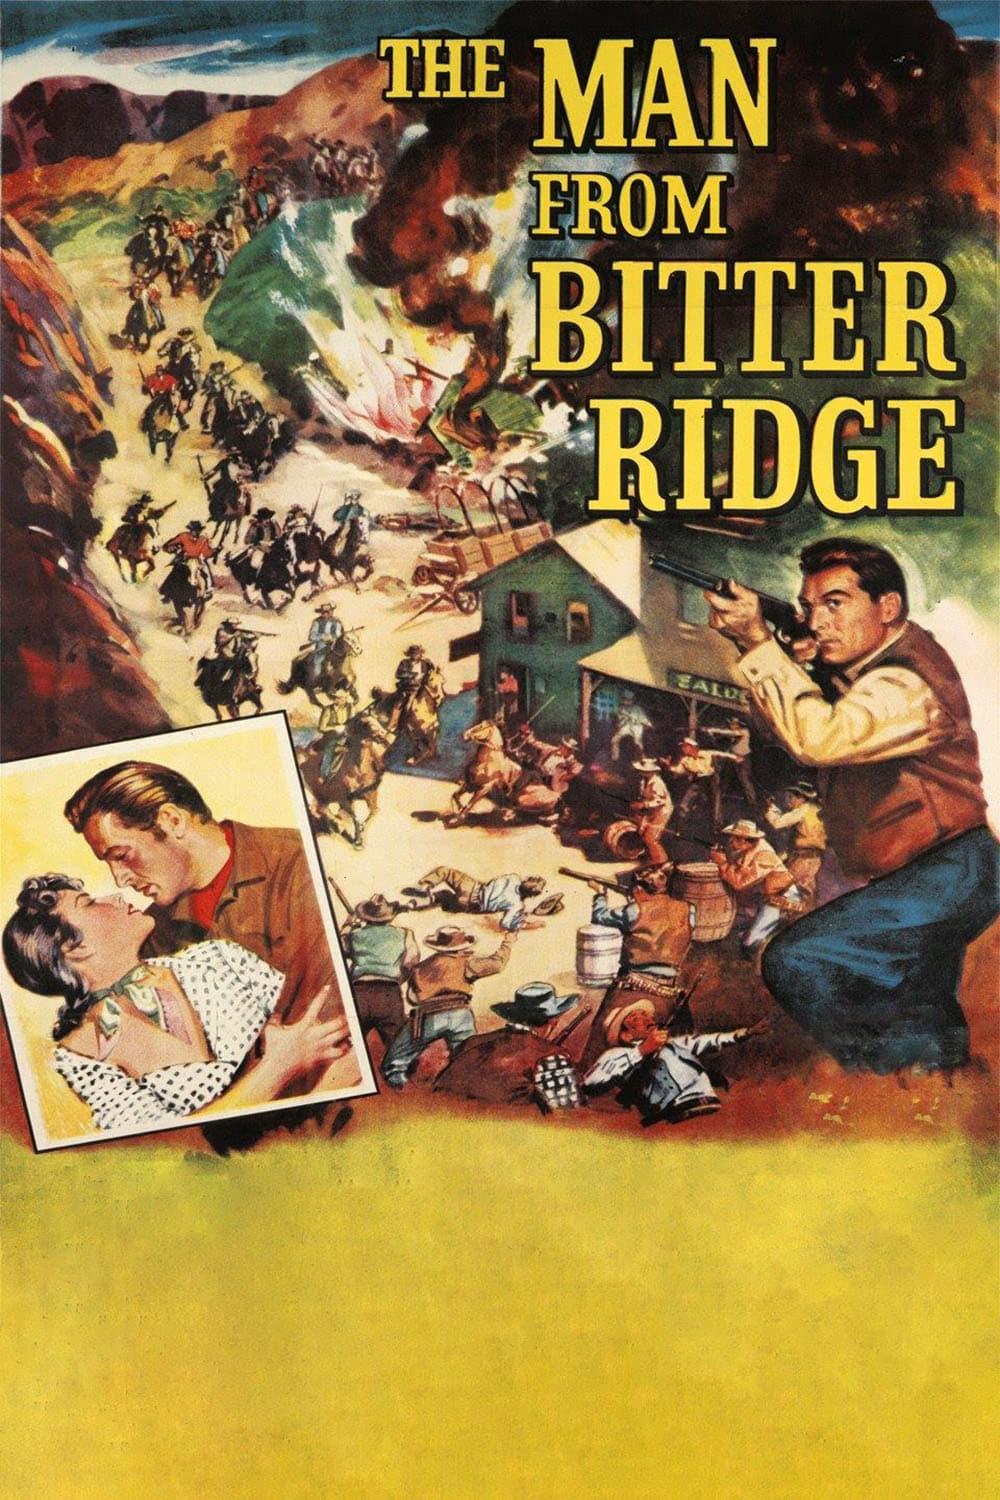 The Man from Bitter Ridge poster